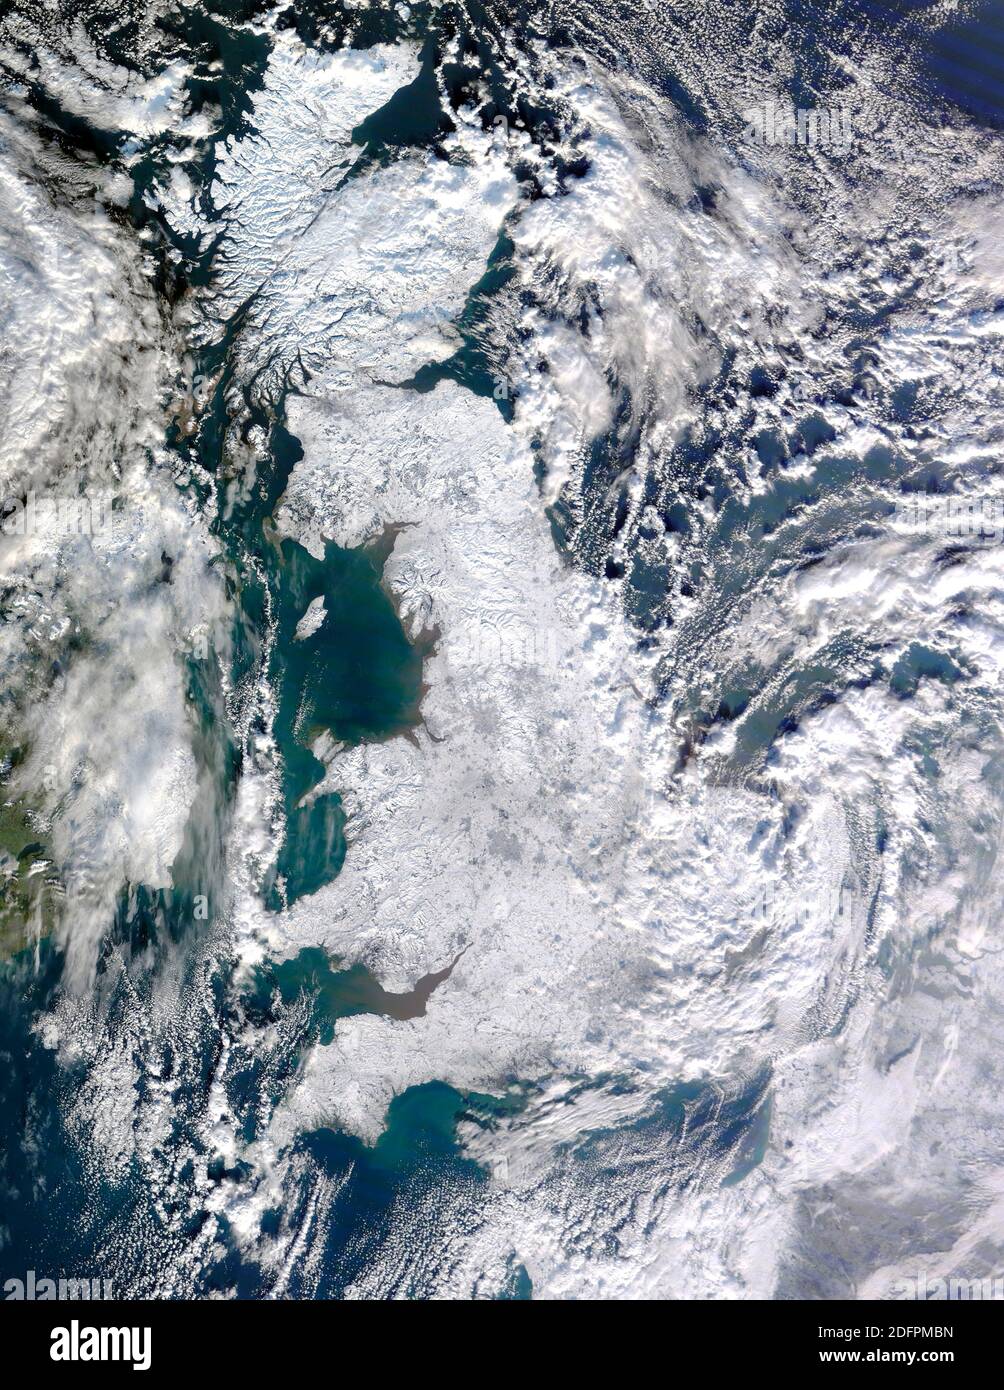 BRITISH ISLES -- 07 January 2010 - This NASA satellite image shows the United Kingdom of Great Britain and Northern Ireland almost entirely blanketed Stock Photo